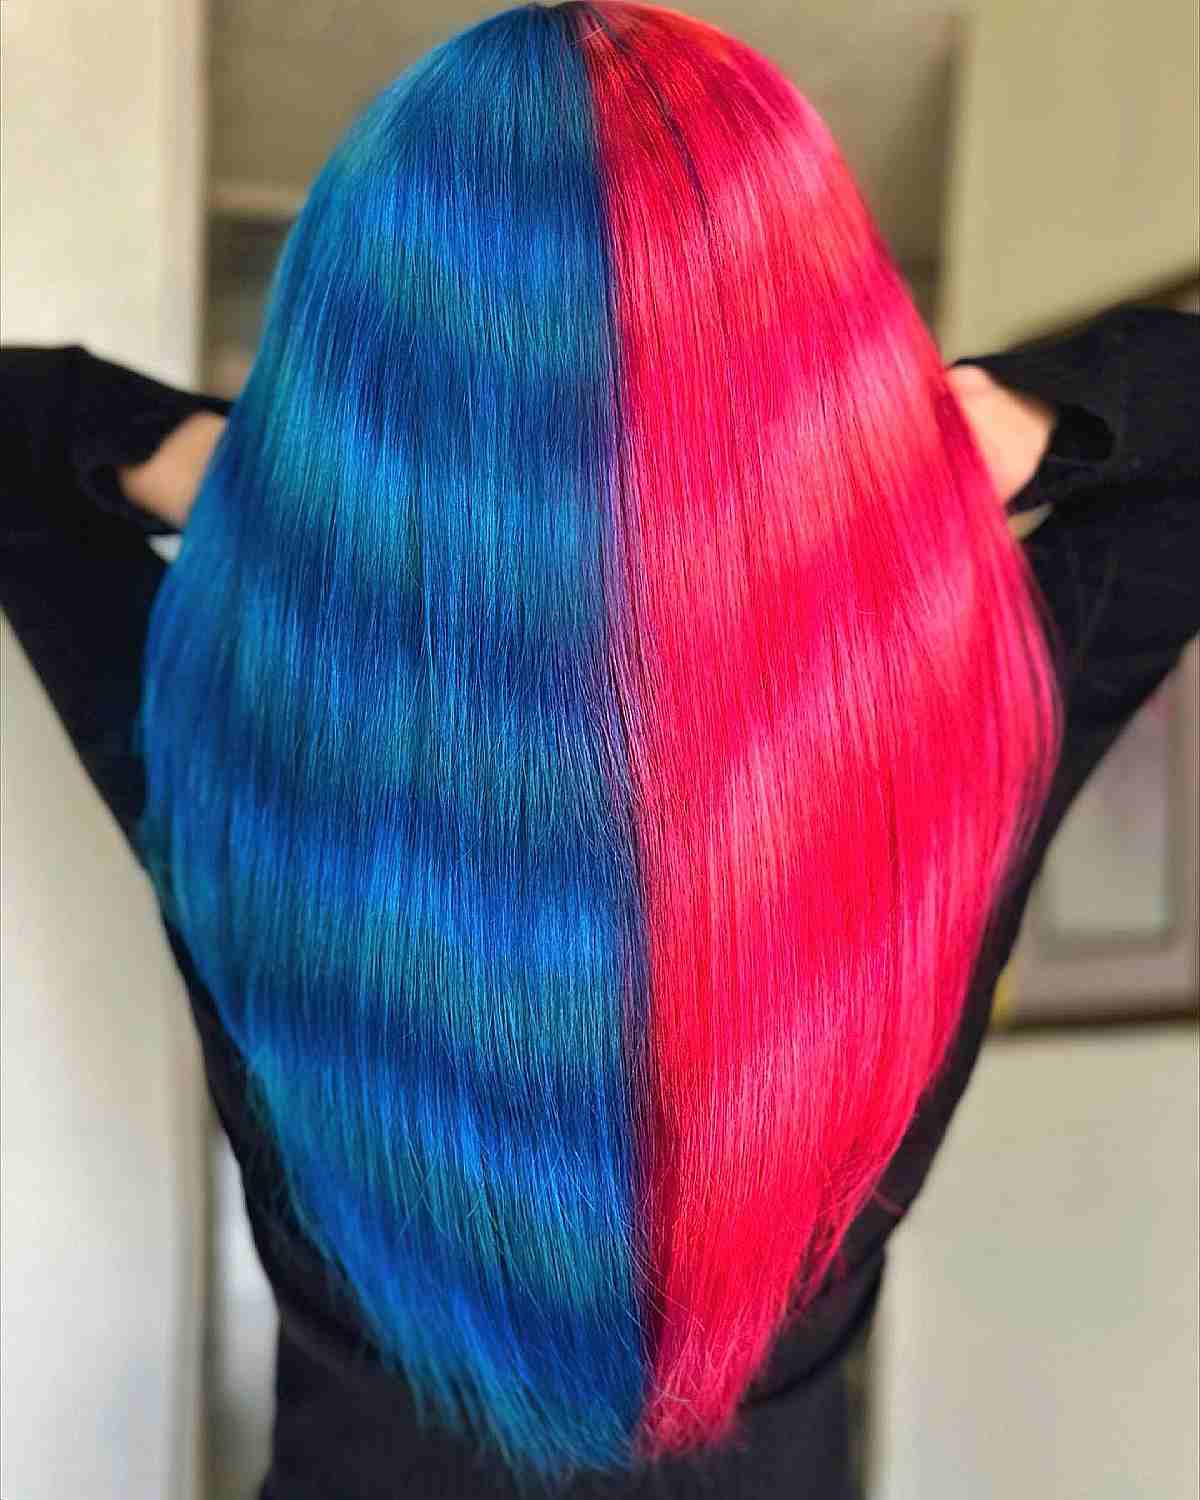 Split Dye Hot Pink and Blue Raccoon Tail Hair with Long Cut and Bangs